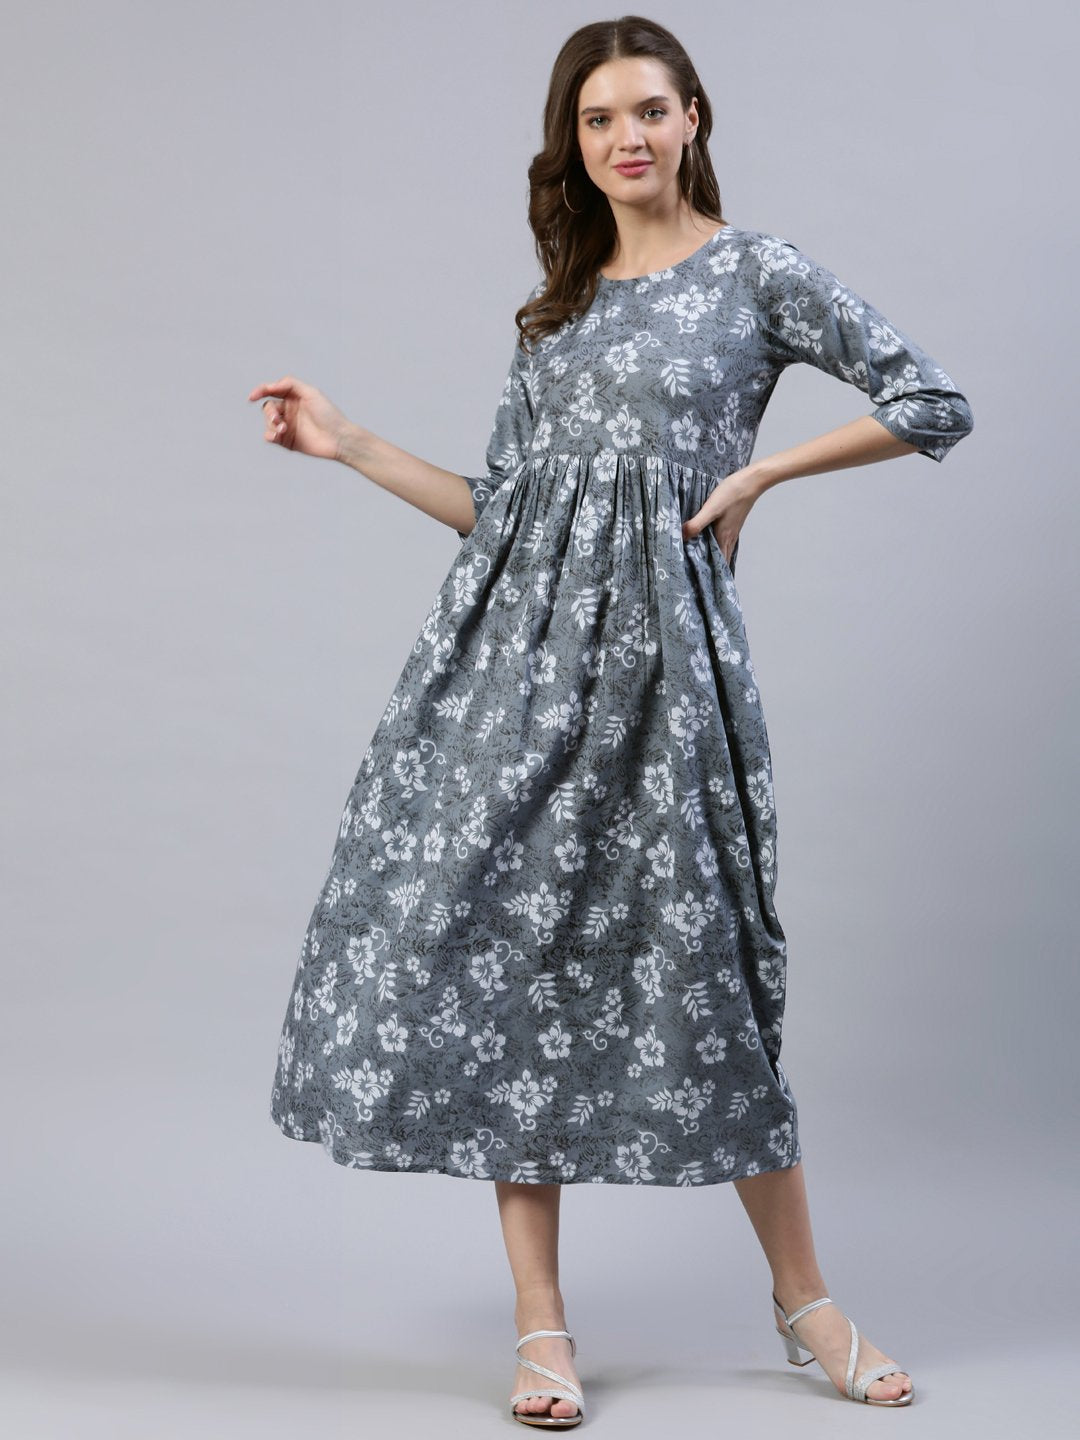 Women's Grey Floral Printed Dress With Three Quarter Sleeves - Nayo Clothing